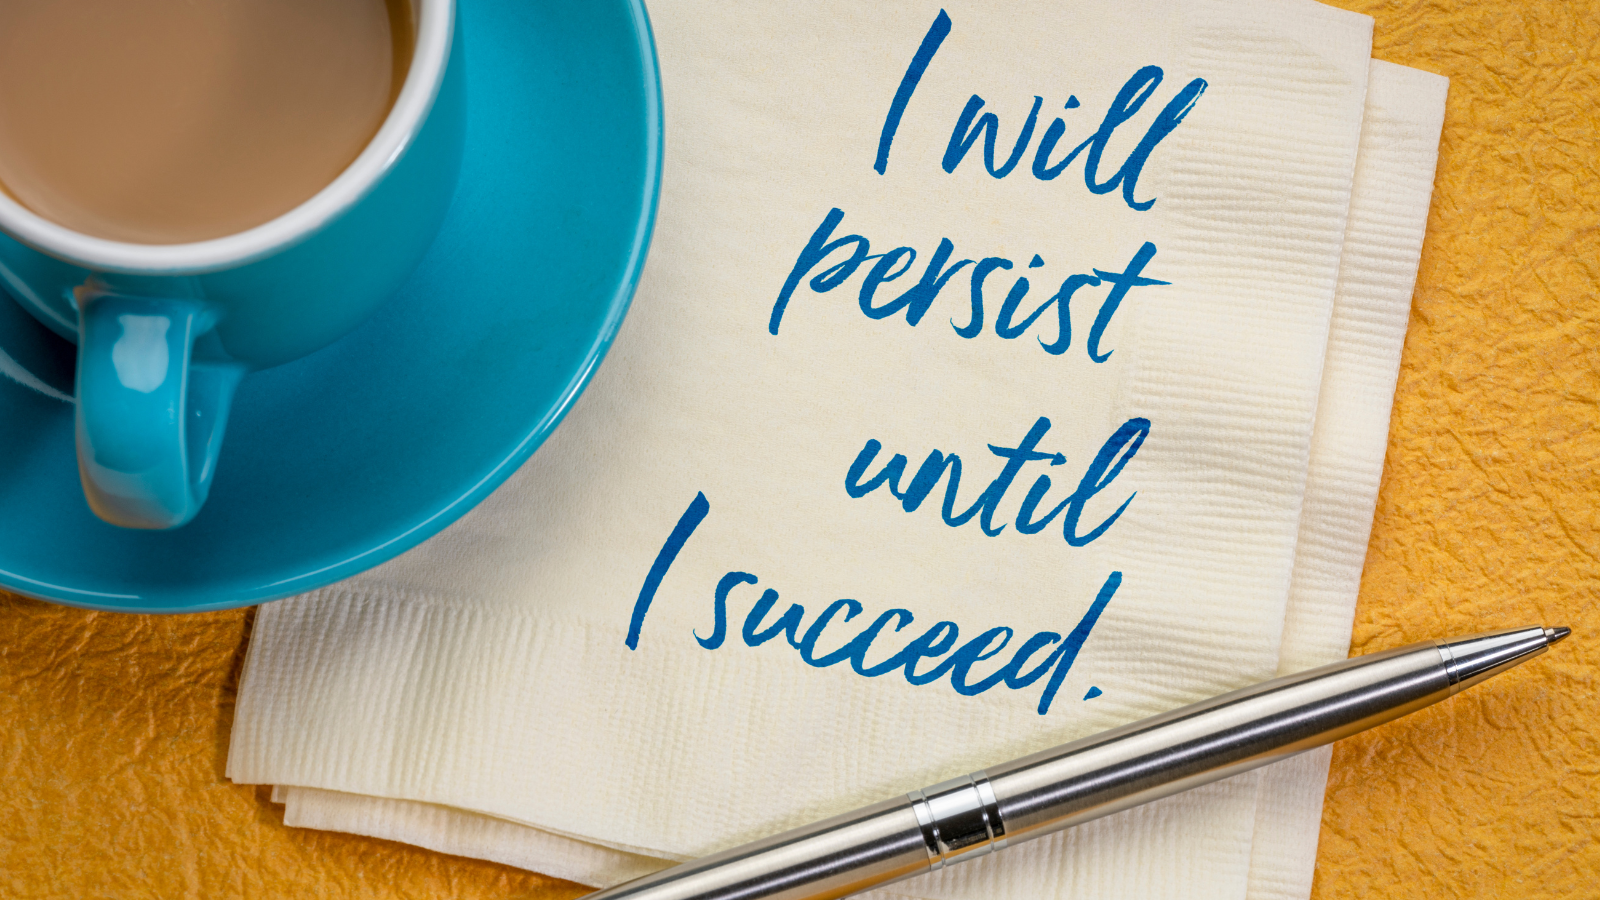 The Secret Weapon of Persistence